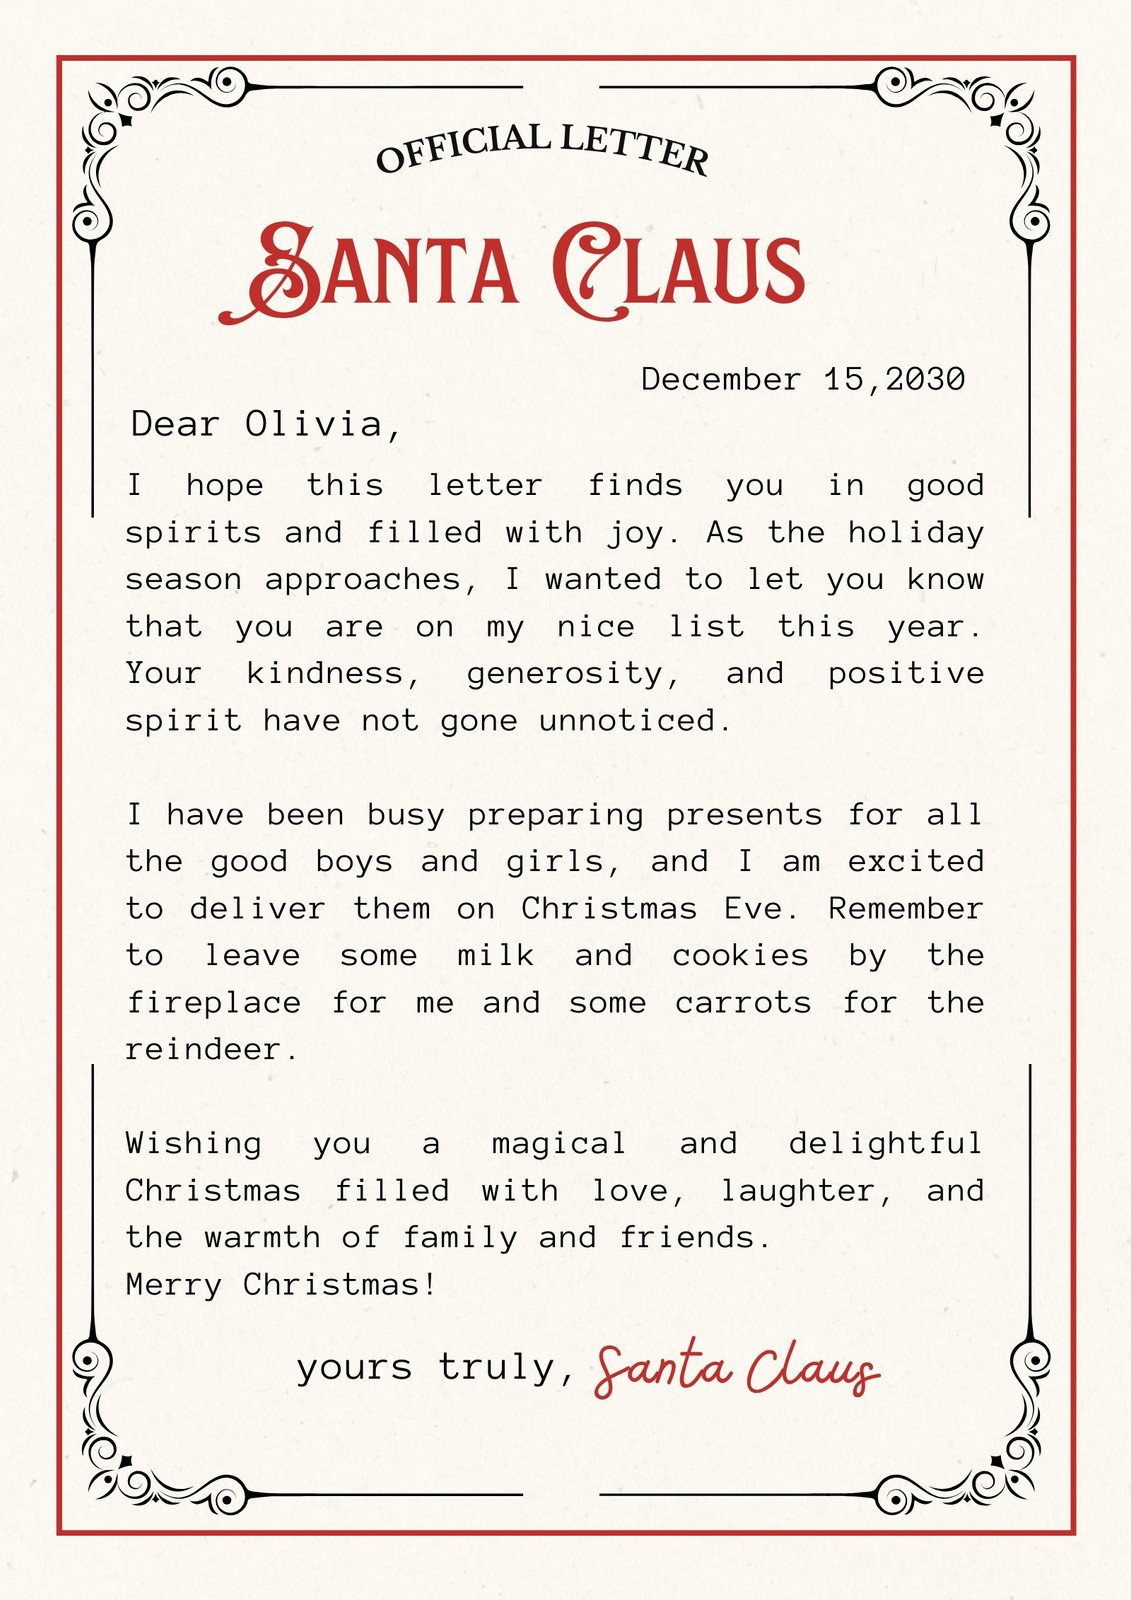 Christmas Wish list, Letter to Santa Claus